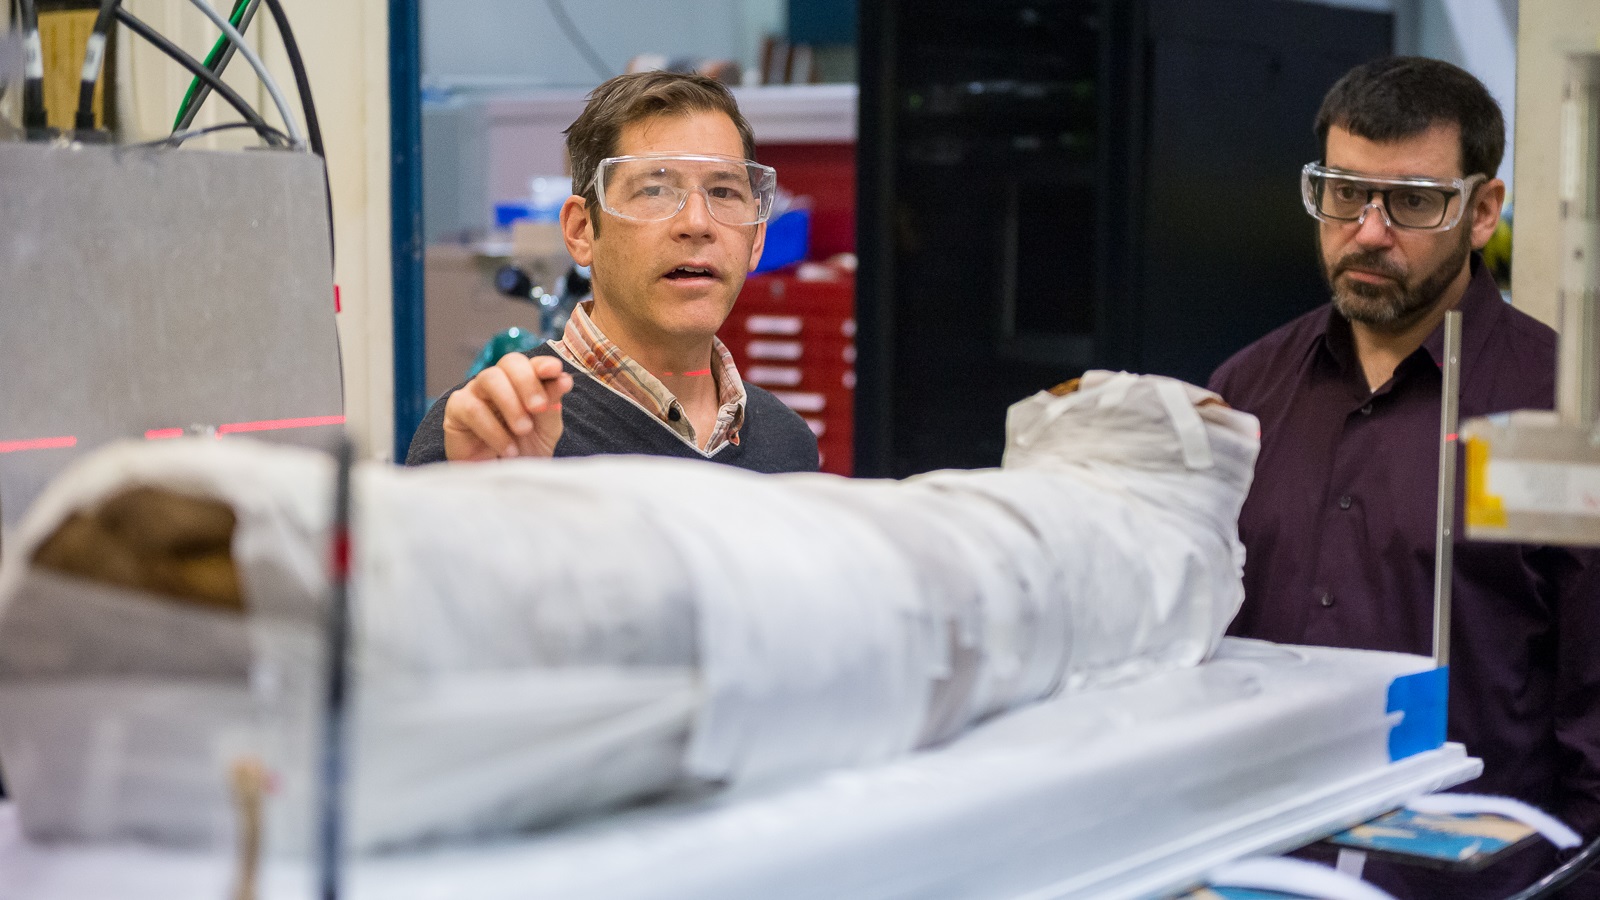 Argonne physicist and group leader Jonathan Almer, left, talks with Dan Silverstein of the Block Museum of Art at Northwestern University in 2017. Almer points out the red laser beams that will guide the X-ray probe of the Egyptian mummy in the foreground. (Image by Mark Lopez / Argonne National Laboratory.)